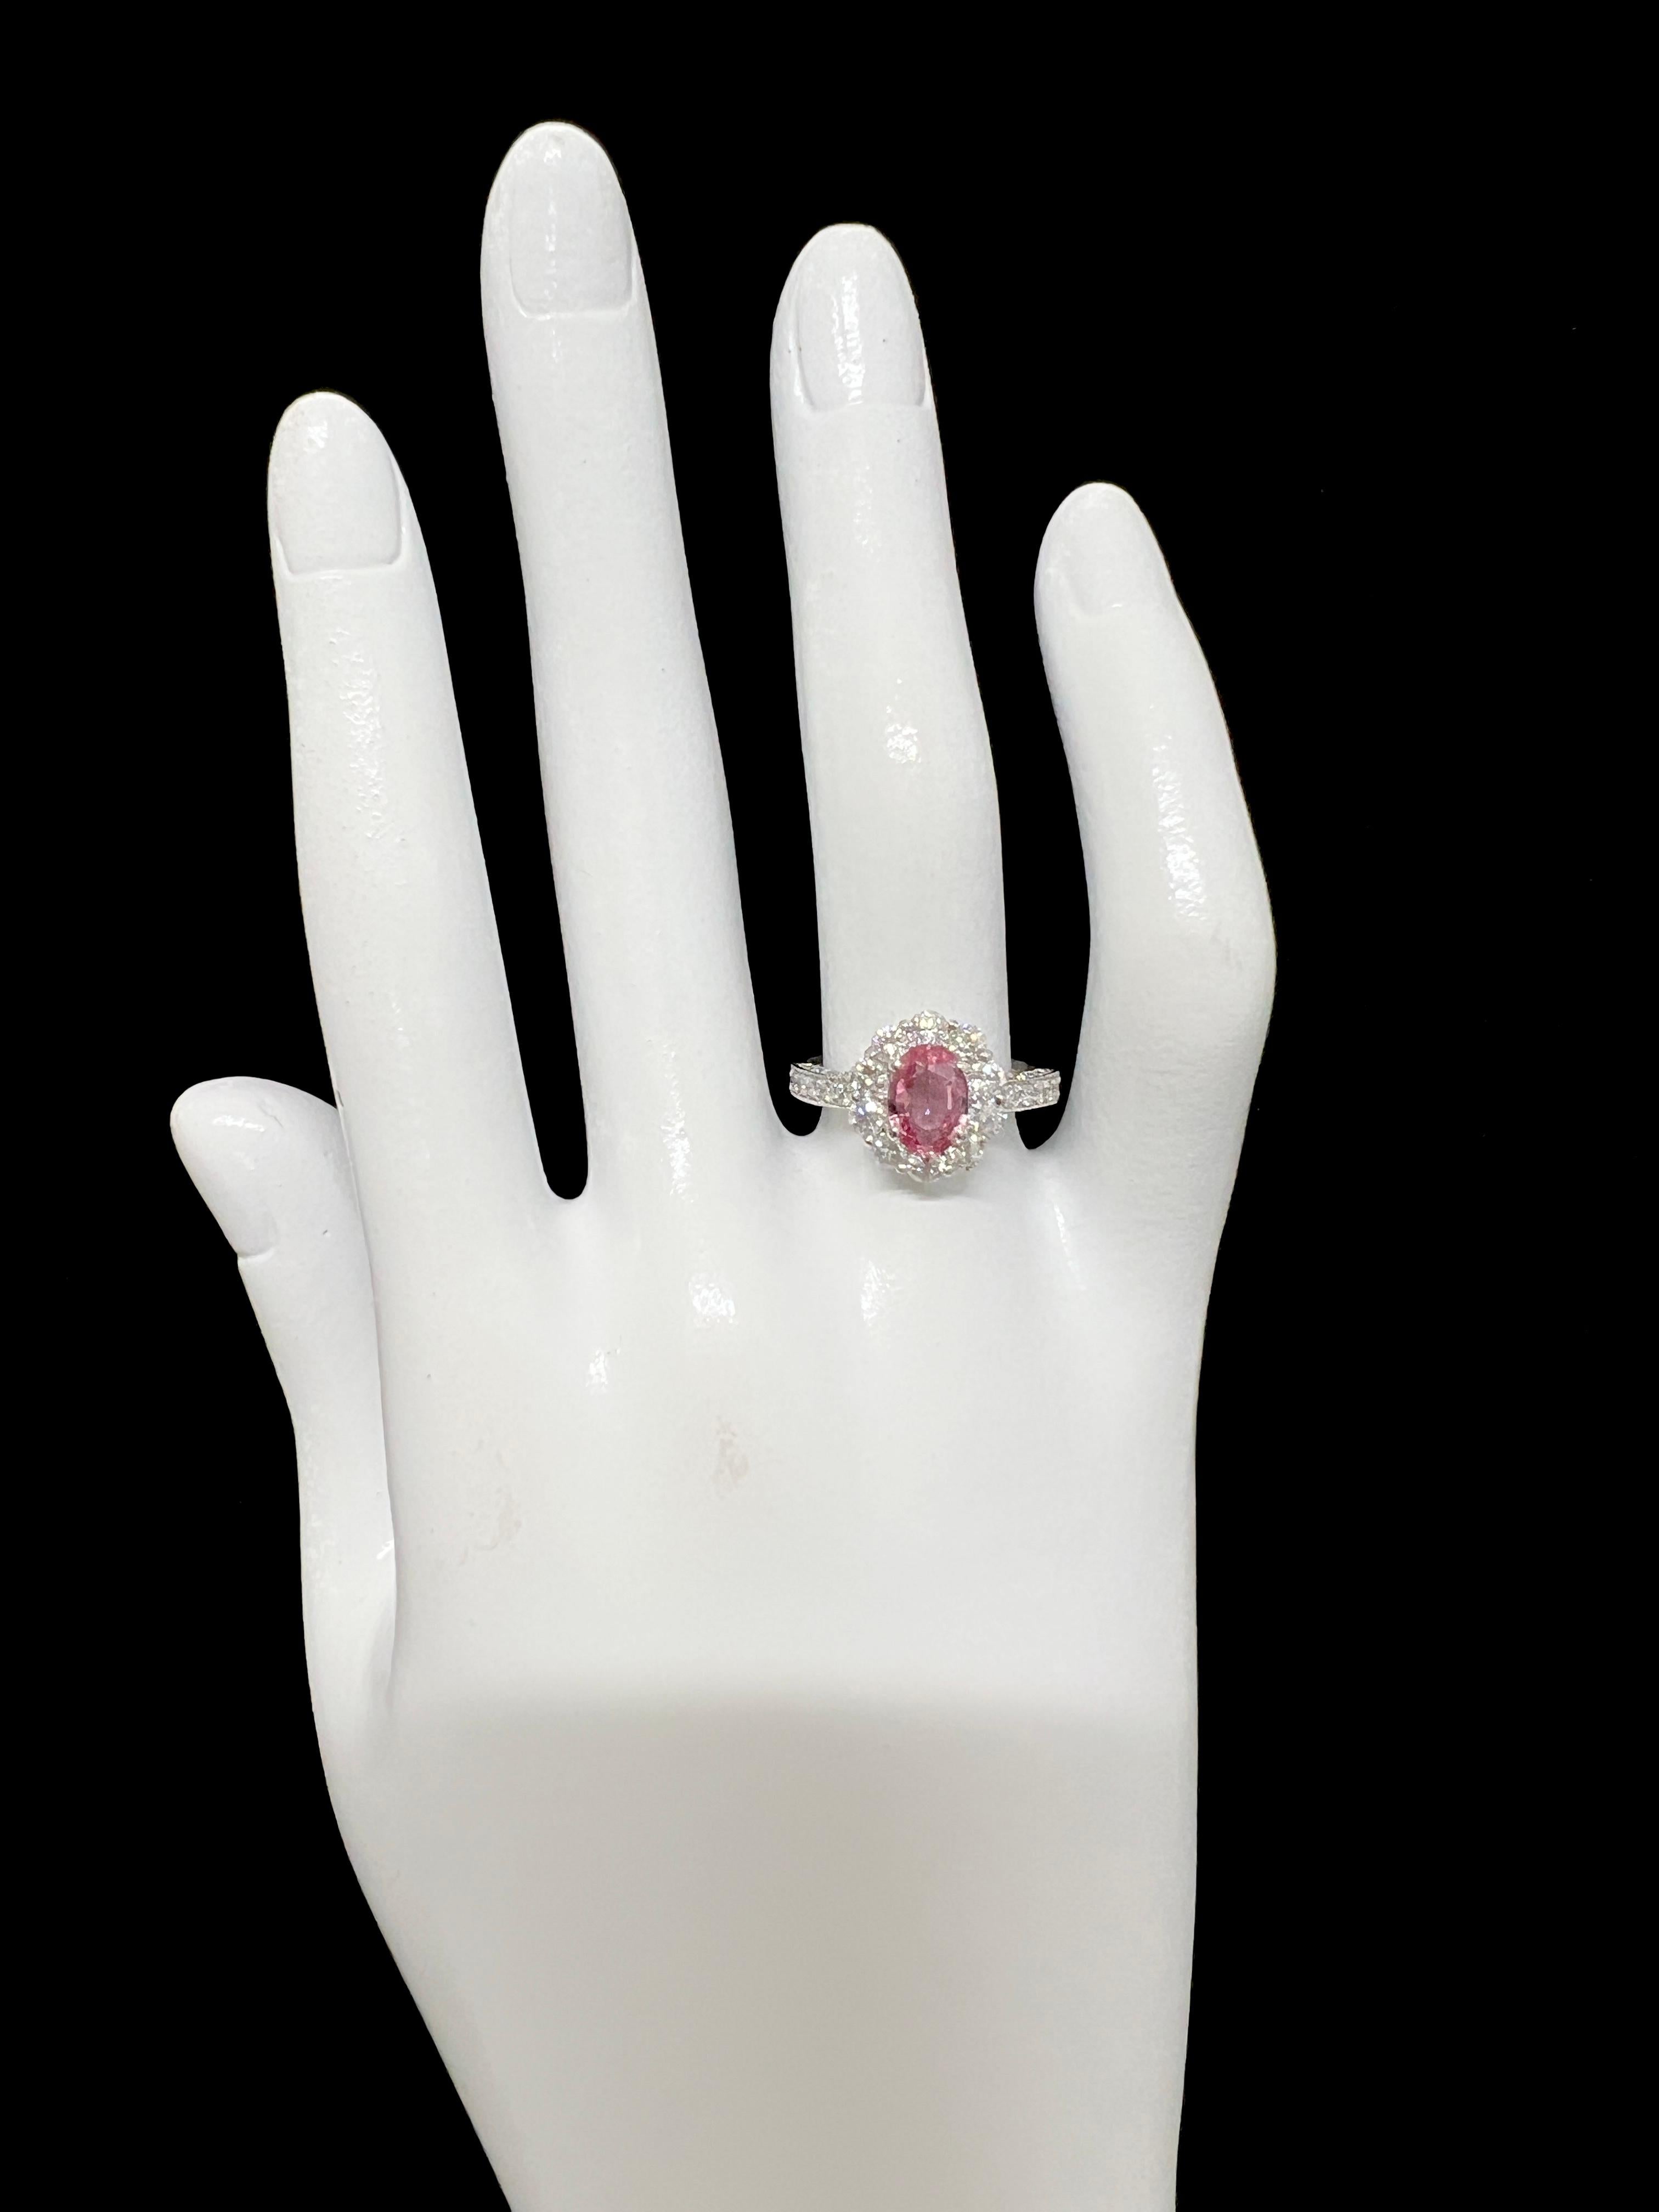 0.92 Carat Natural Padparadscha Sapphire and Diamond Ring Set in Platinum For Sale 1